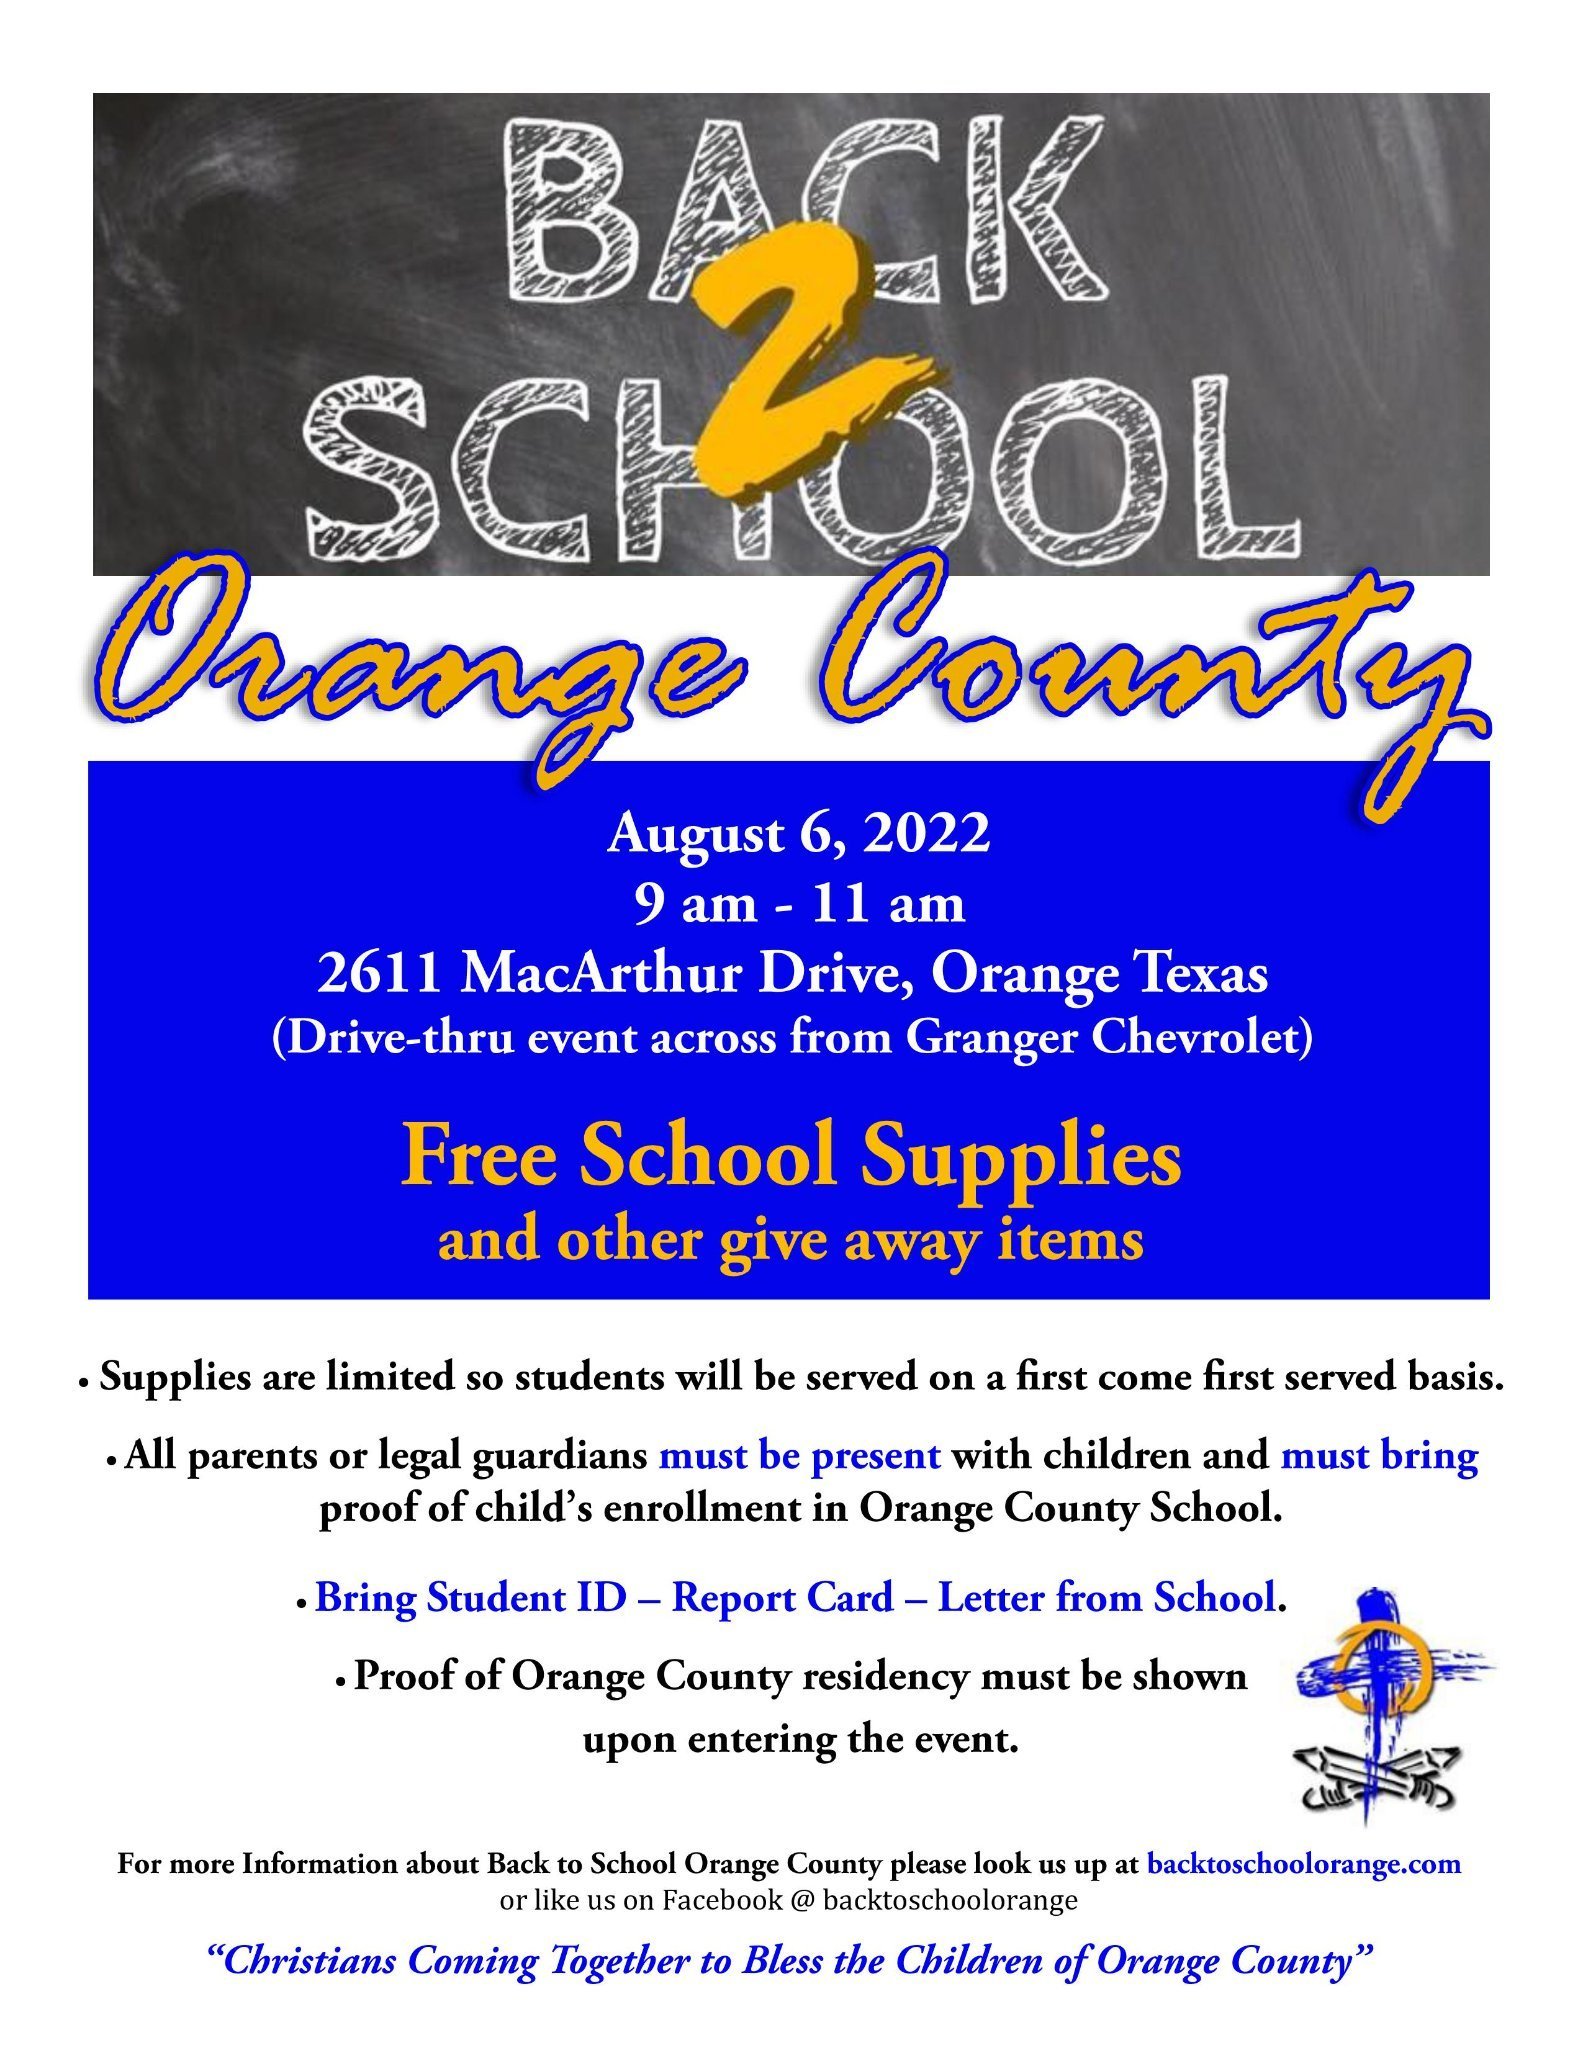 Back to School Orange County TX Collecting Funds to Purchase School